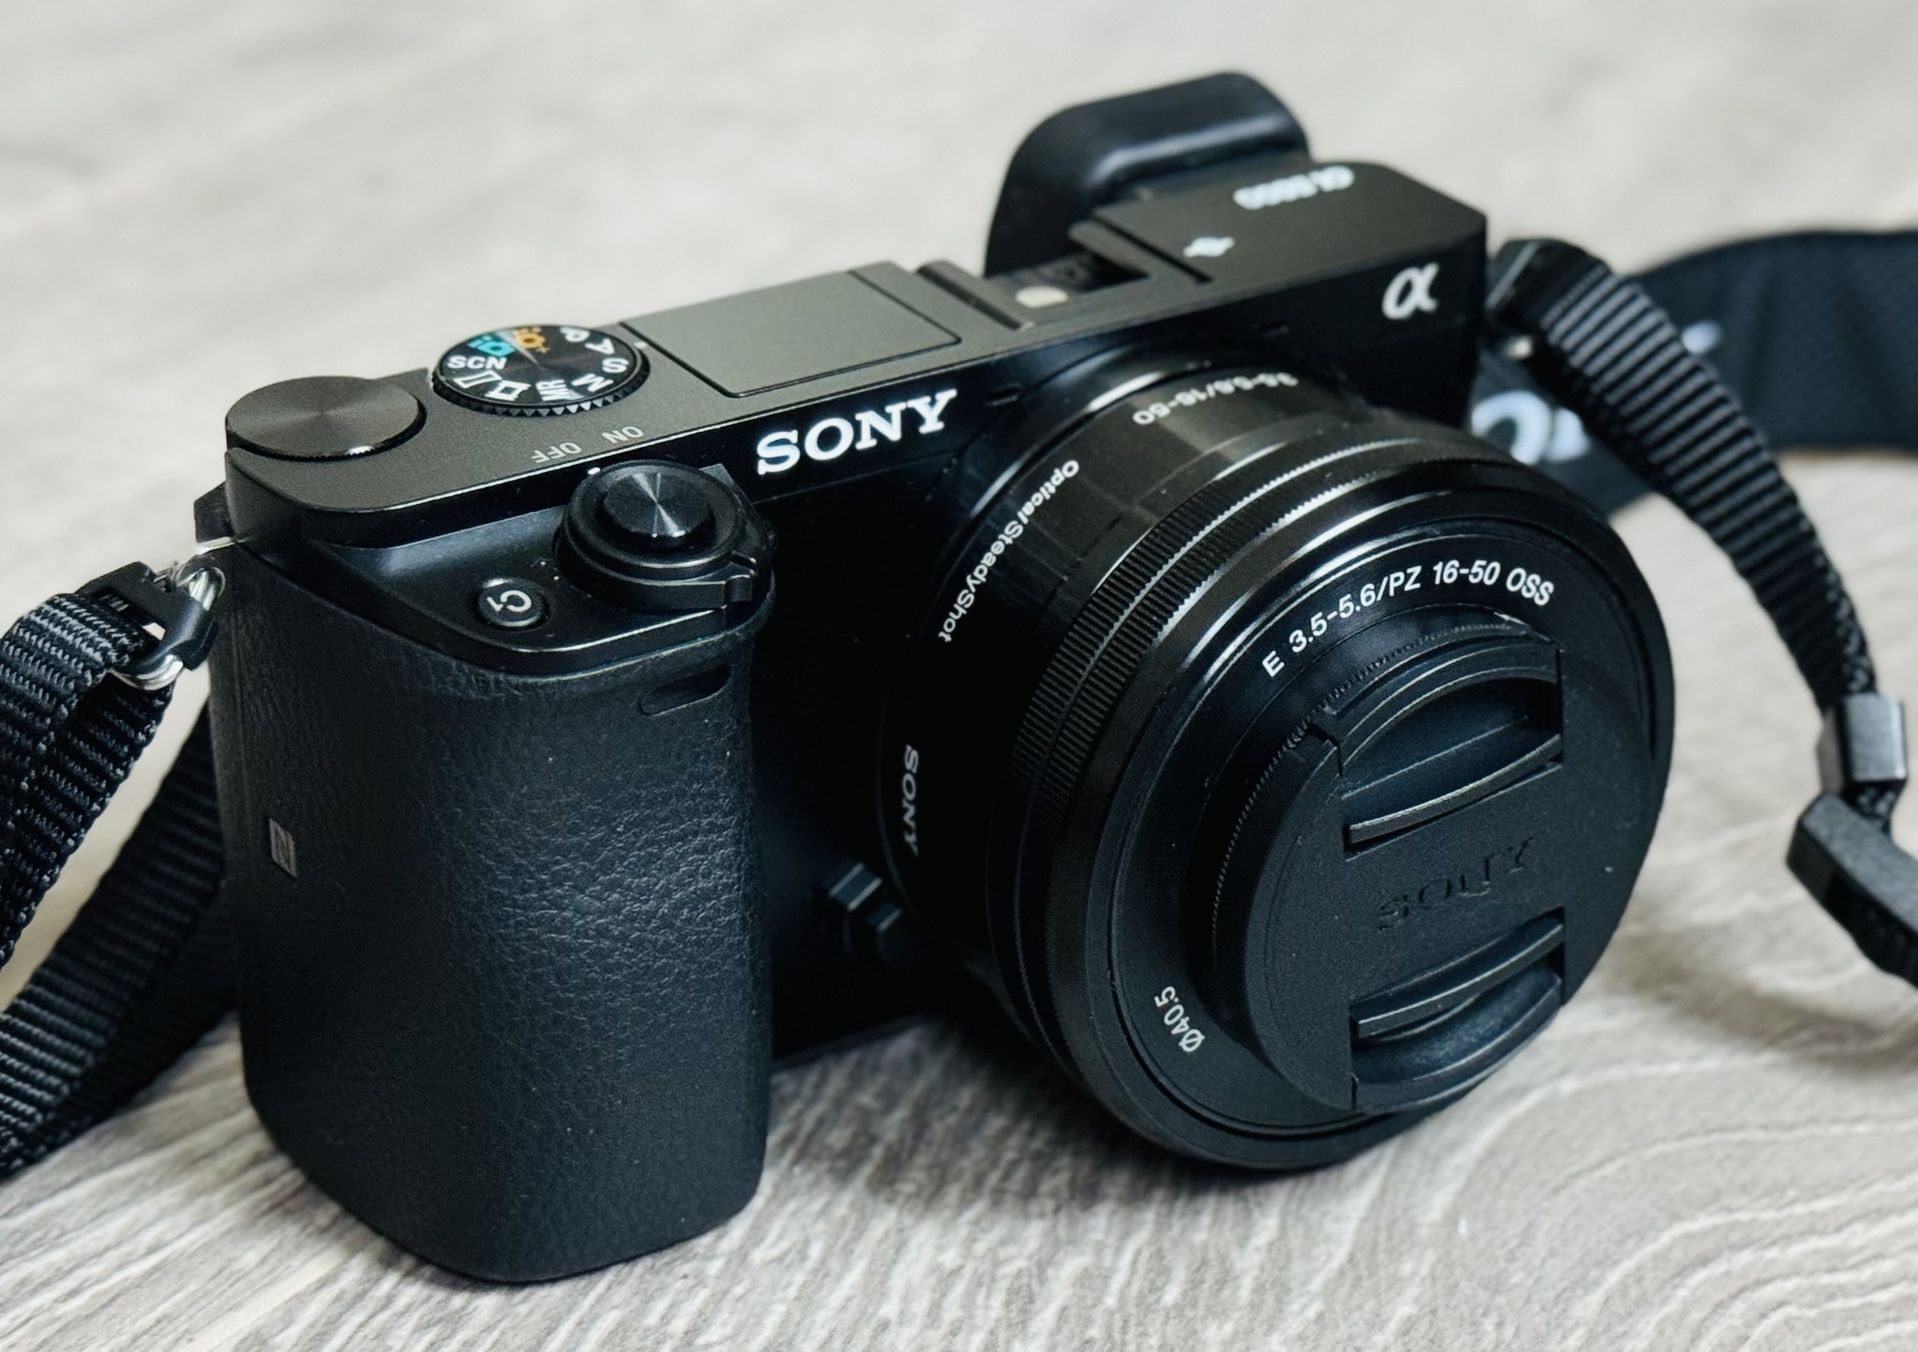 Low Shutter Count! Sony Alpha a6000 Camera  w/16-50mm Power Zoom Lens - Price is FIRM